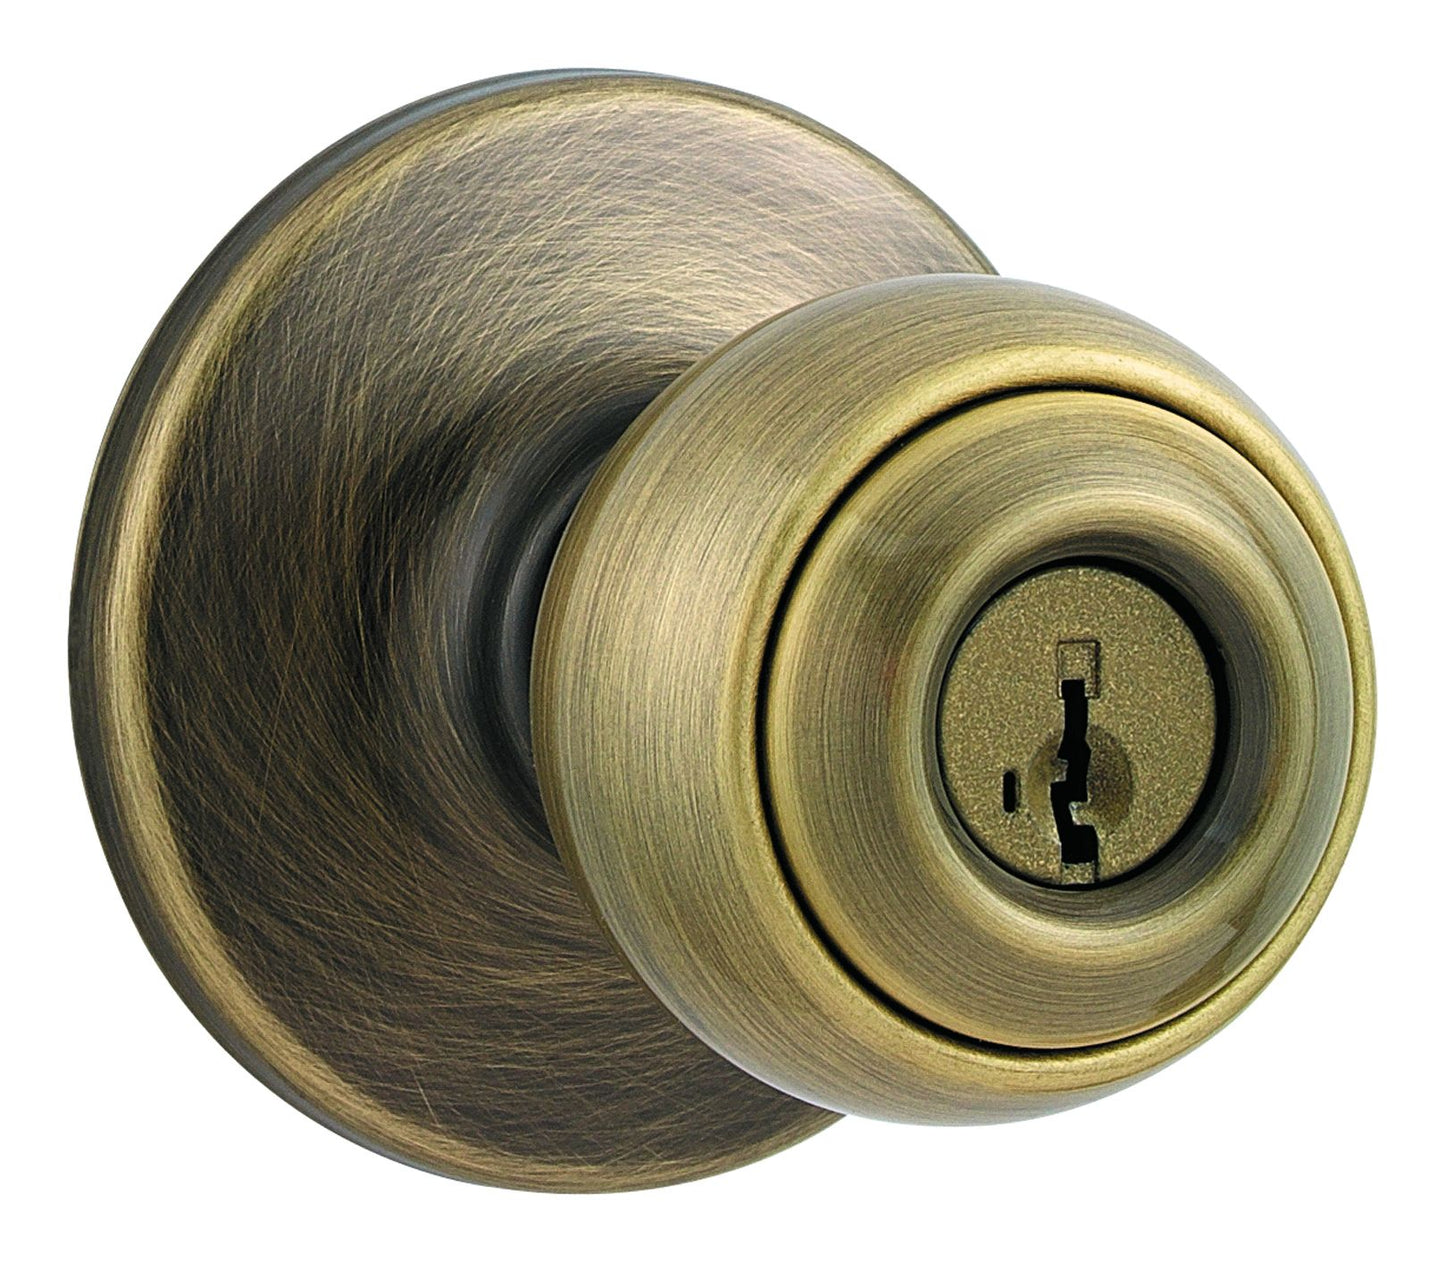 Kwikset 400P-5SV1 Polo Knob Entry Door Lock SmartKey with New Chassis with 6AL Latch and RCS Strike Antique Brass Finish